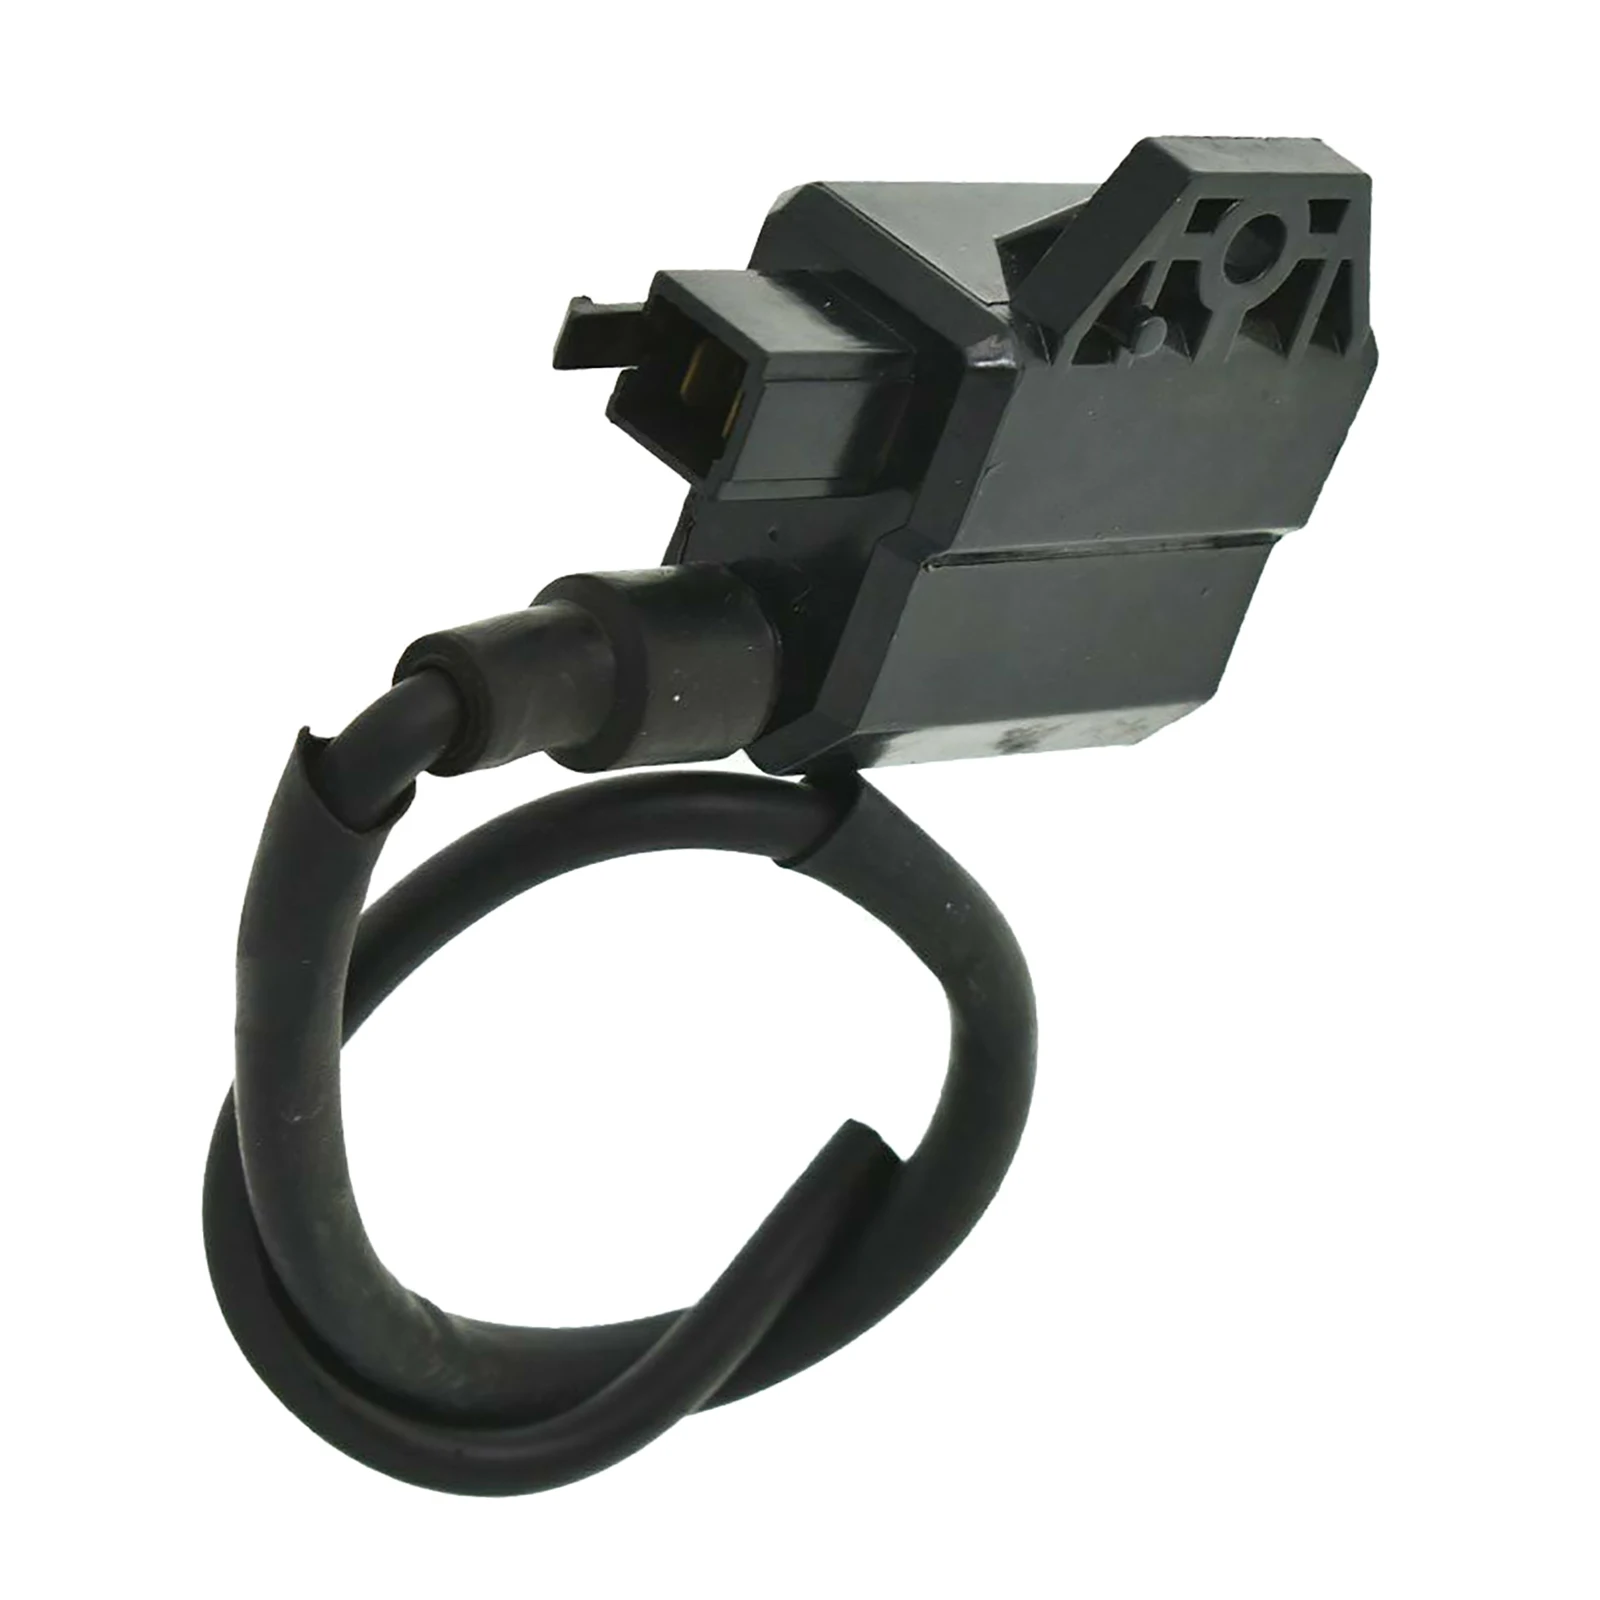 Ignition Coil Cdi 3340B00 Direct Replaces Fits for LT80 LT 80 ATV